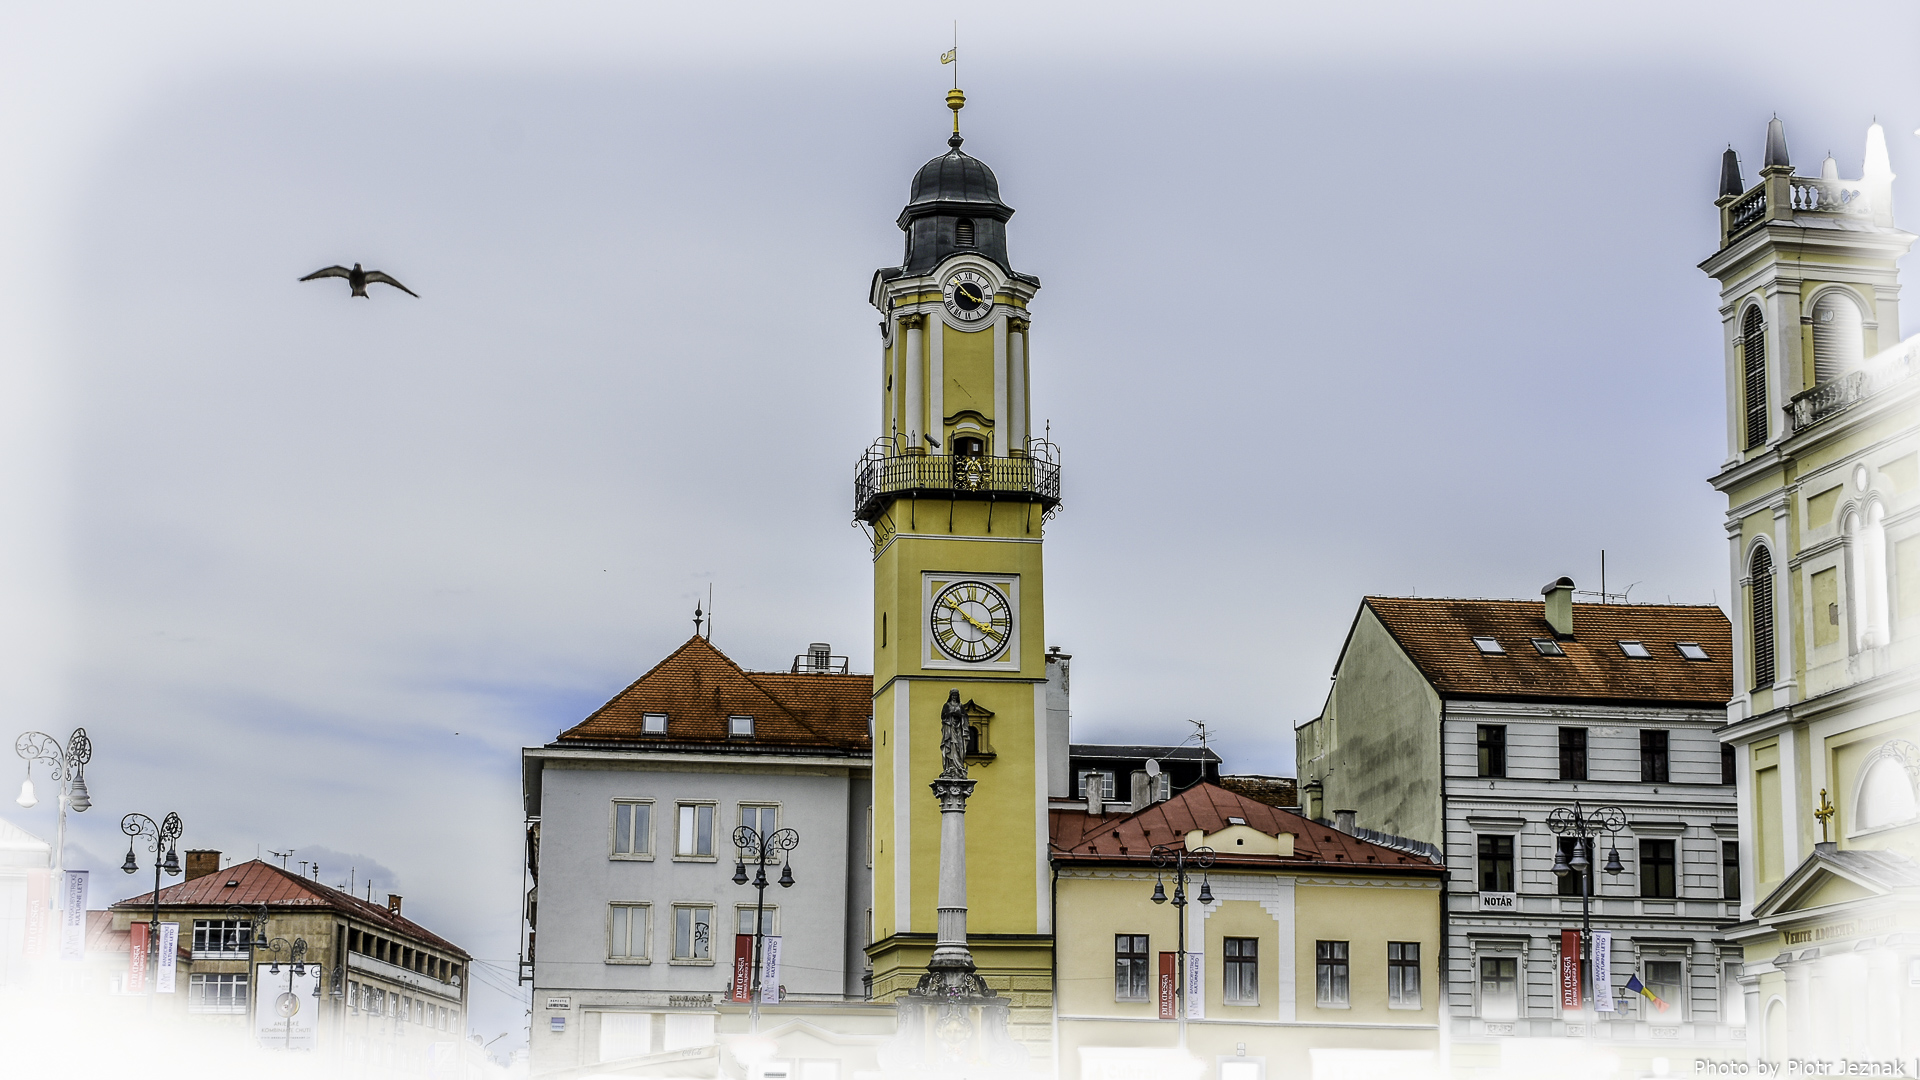 The Clock Tower at the Banska Bystrica's main square.